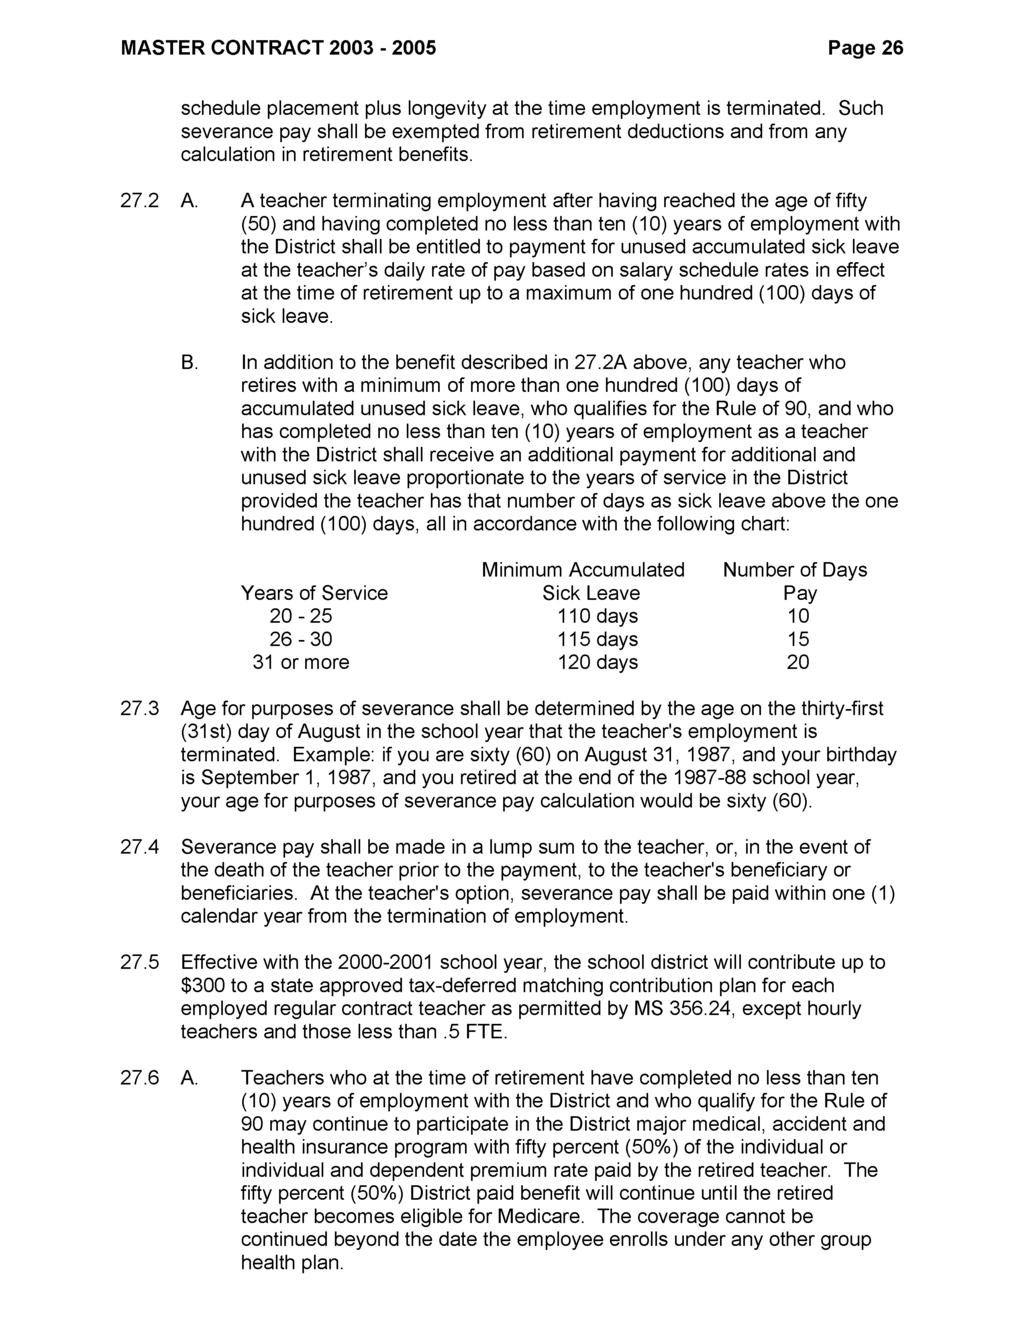 MASTER CONTRACT 2003-2005 Page 26 schedule placement plus longevity at the time employment is terminated.